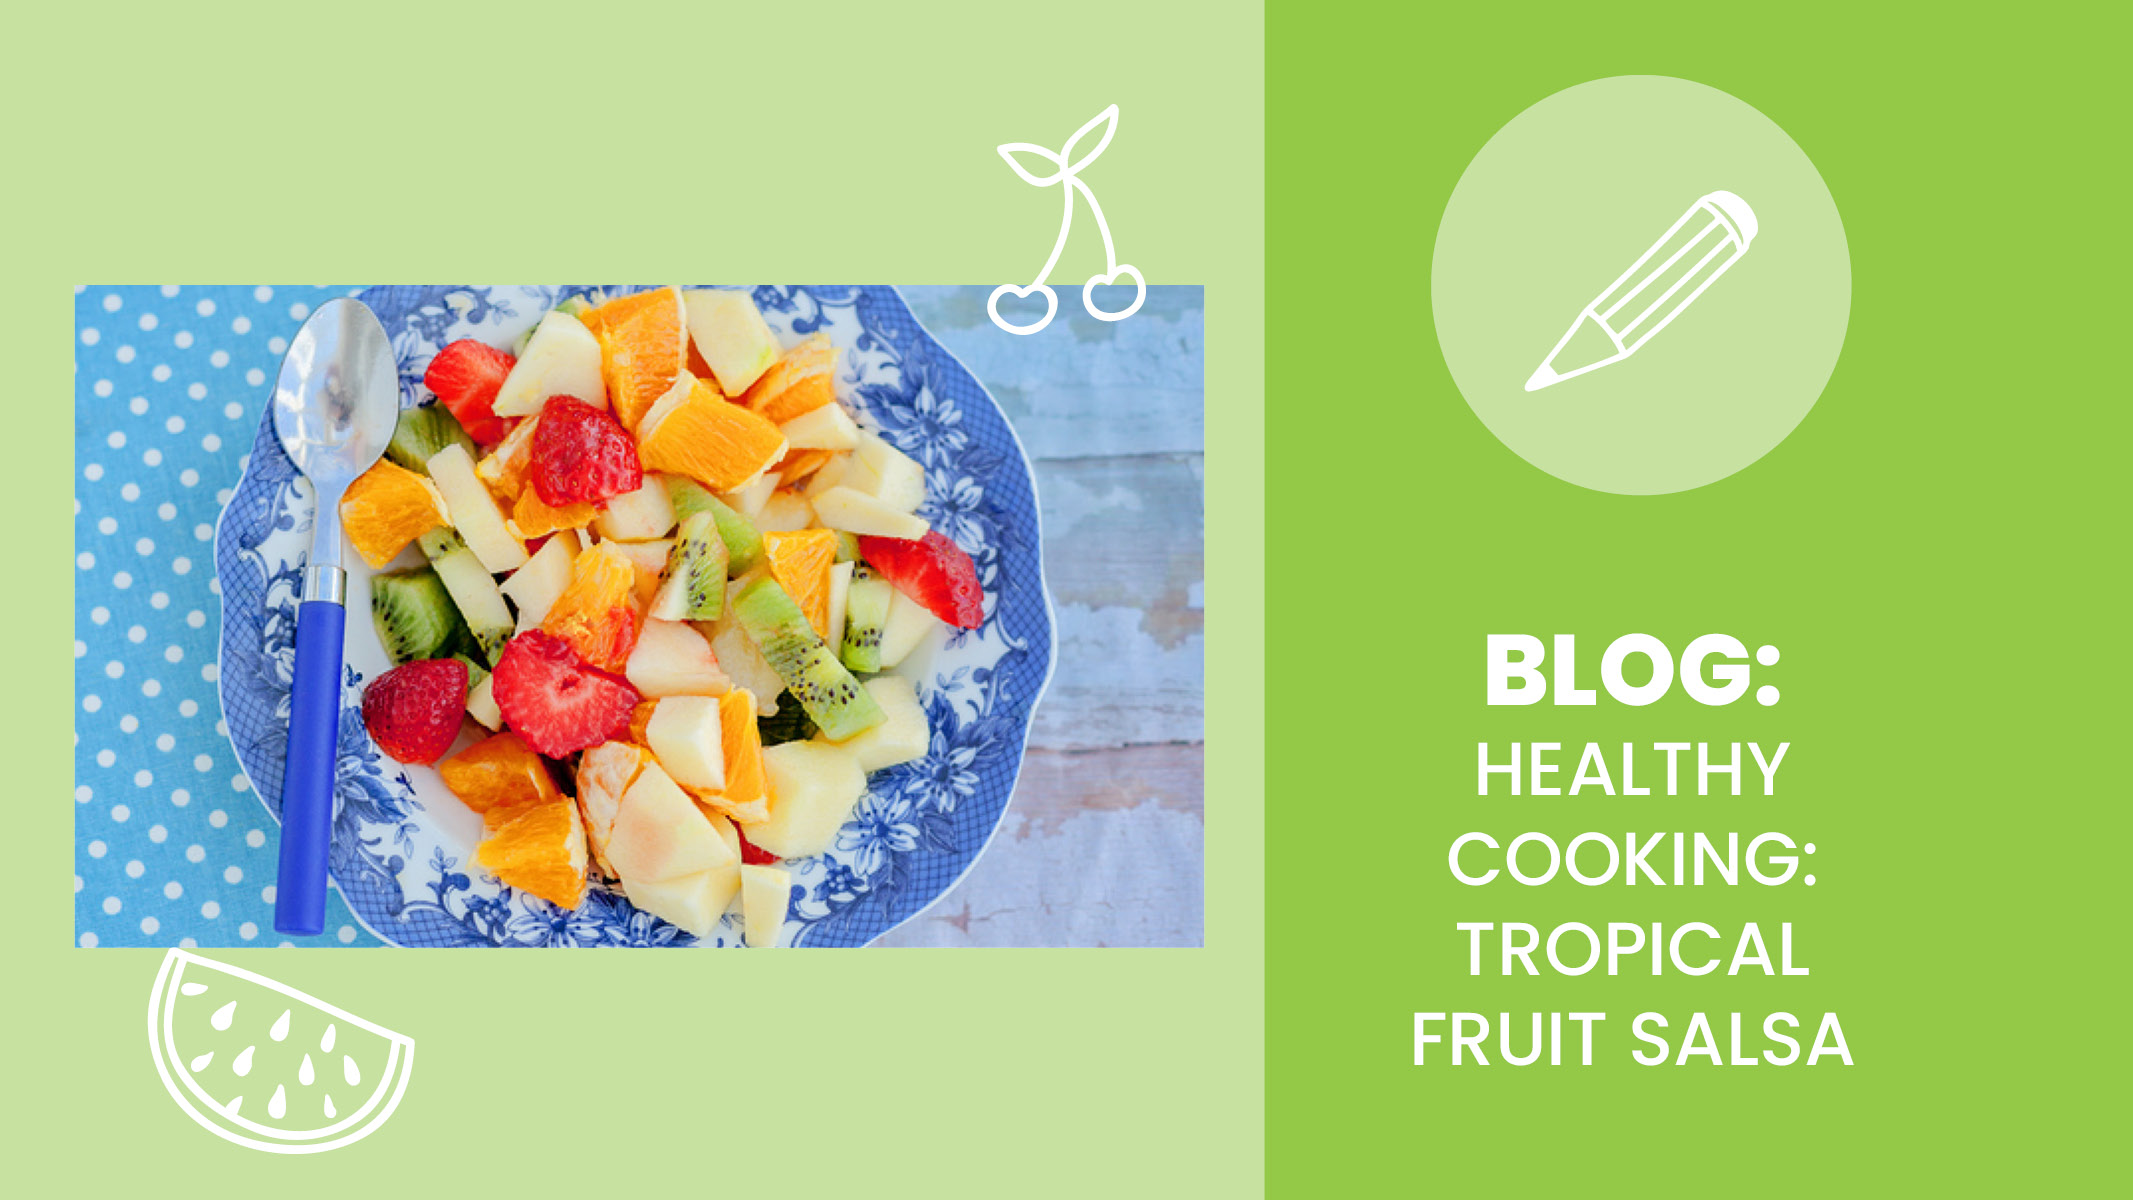 Bowl of sliced fruit made as a healthy snack